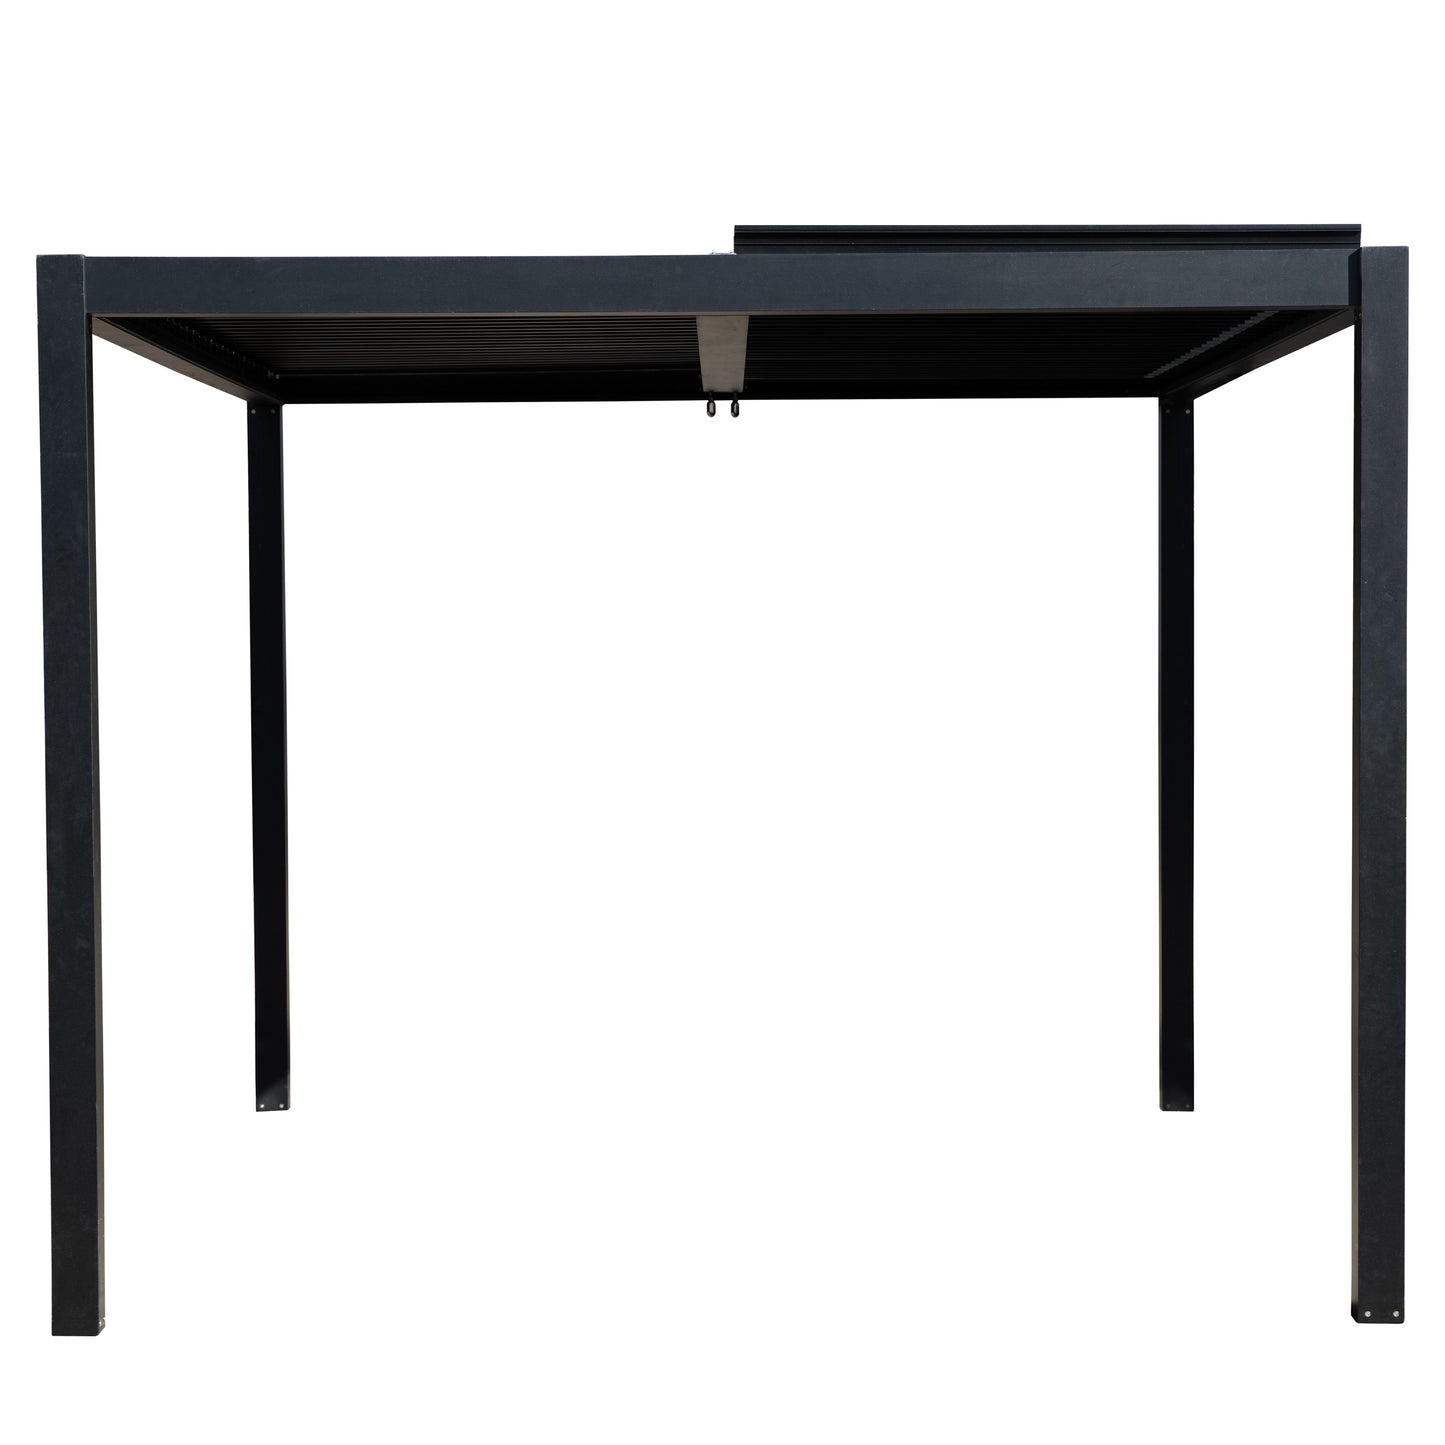 A black 3000x4000mm dining table with a black top for interior decor or home furniture from Kikiathome.co.uk.